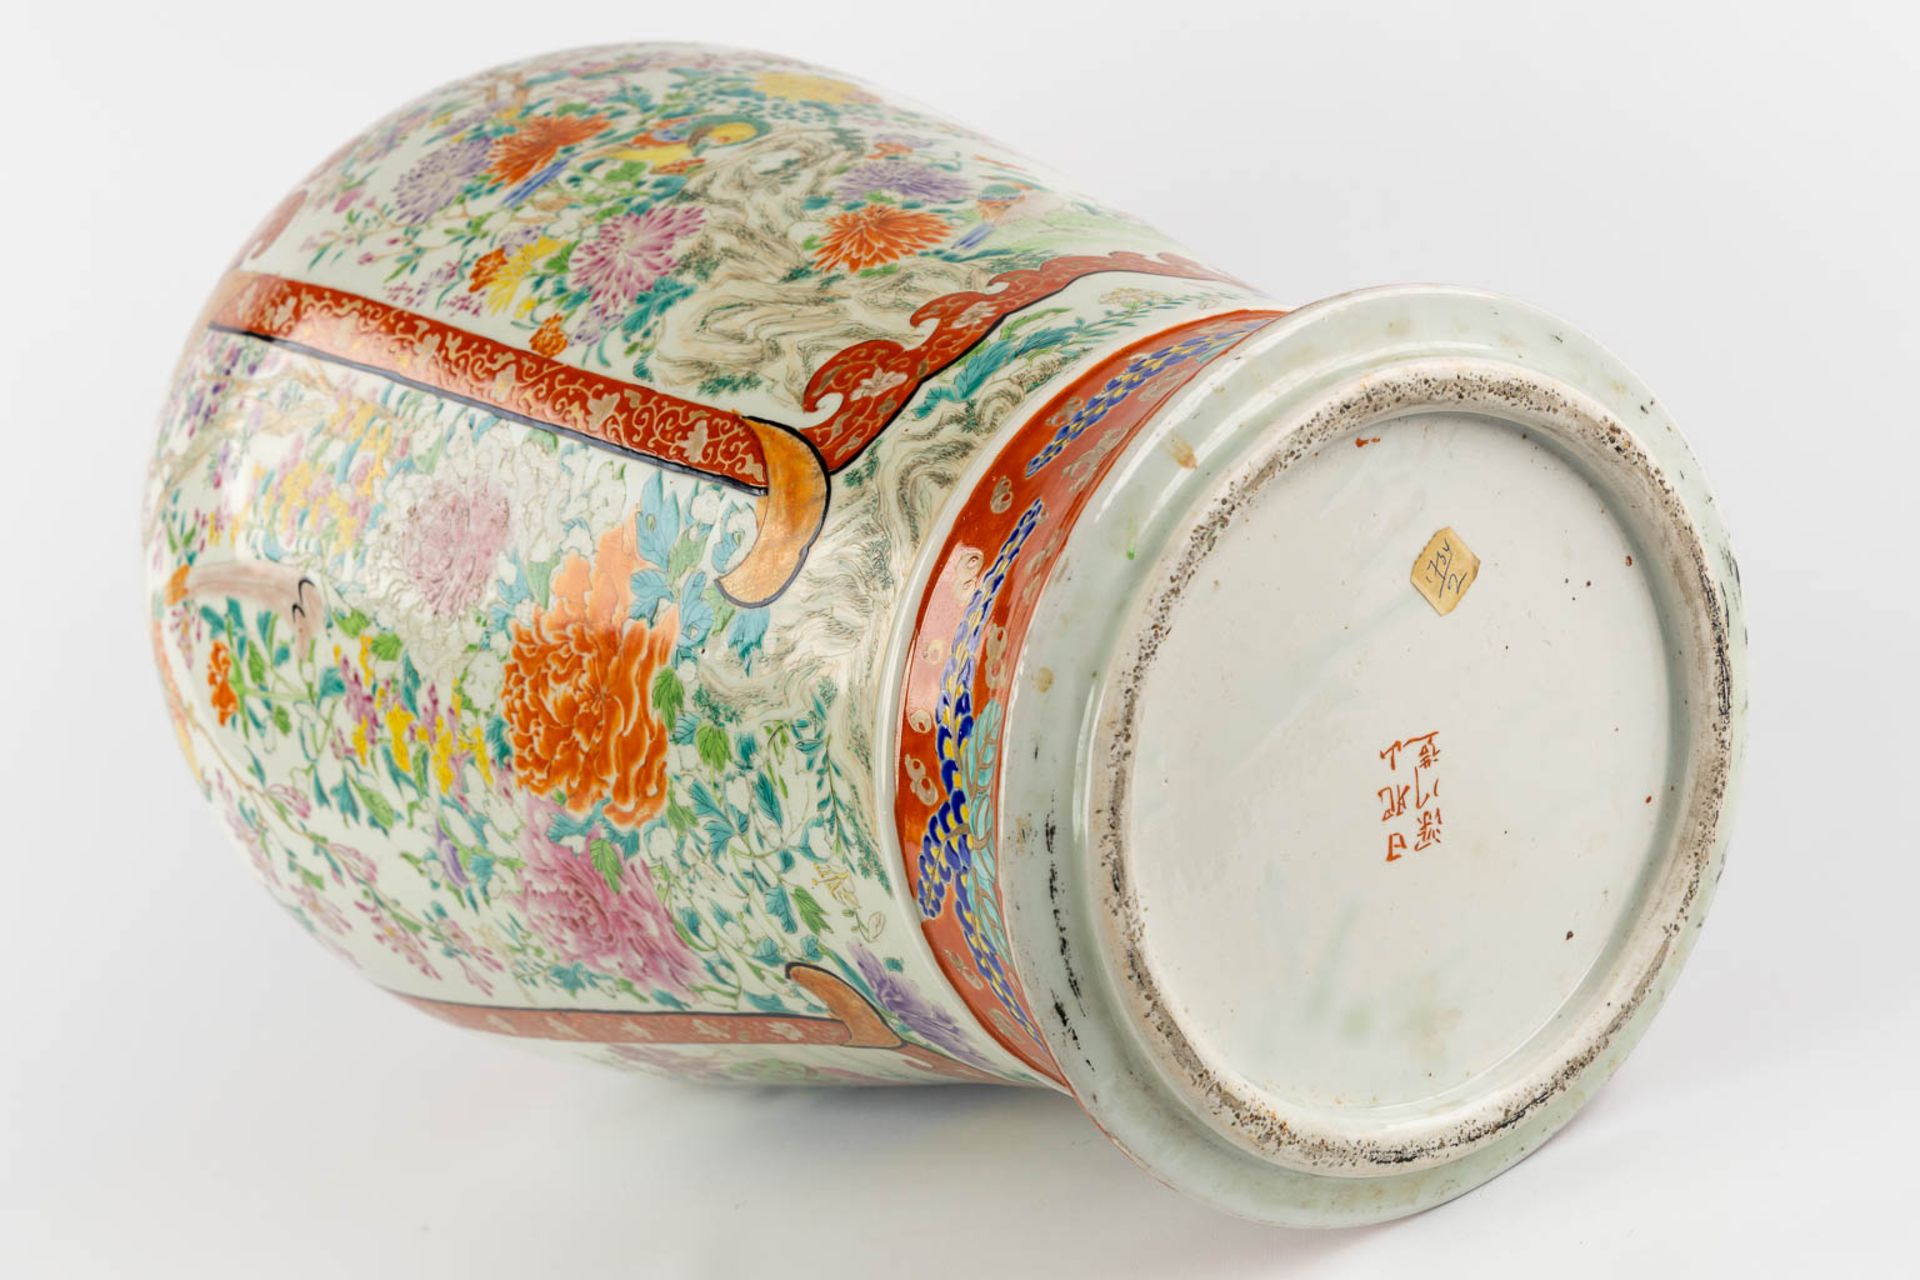 A large Japanese Kutani vase, decorated with fauna and flora. 19th C. (H:61 x D:38 cm) - Image 7 of 13